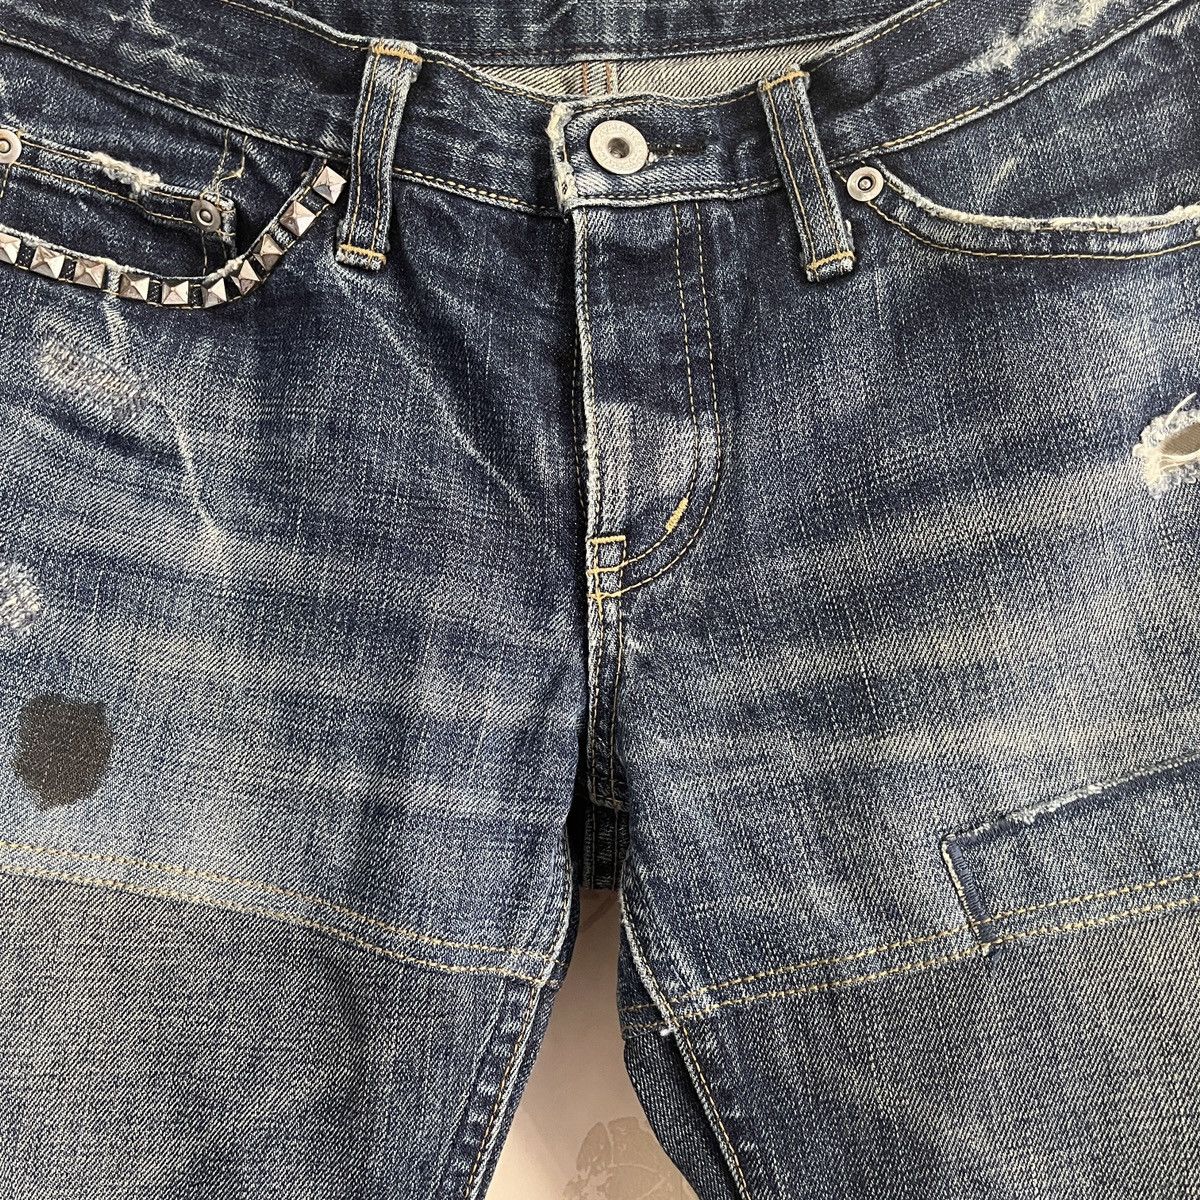 Archival Clothing - Vintage Hysteric Glamour Buttons Denim Jeans - 3